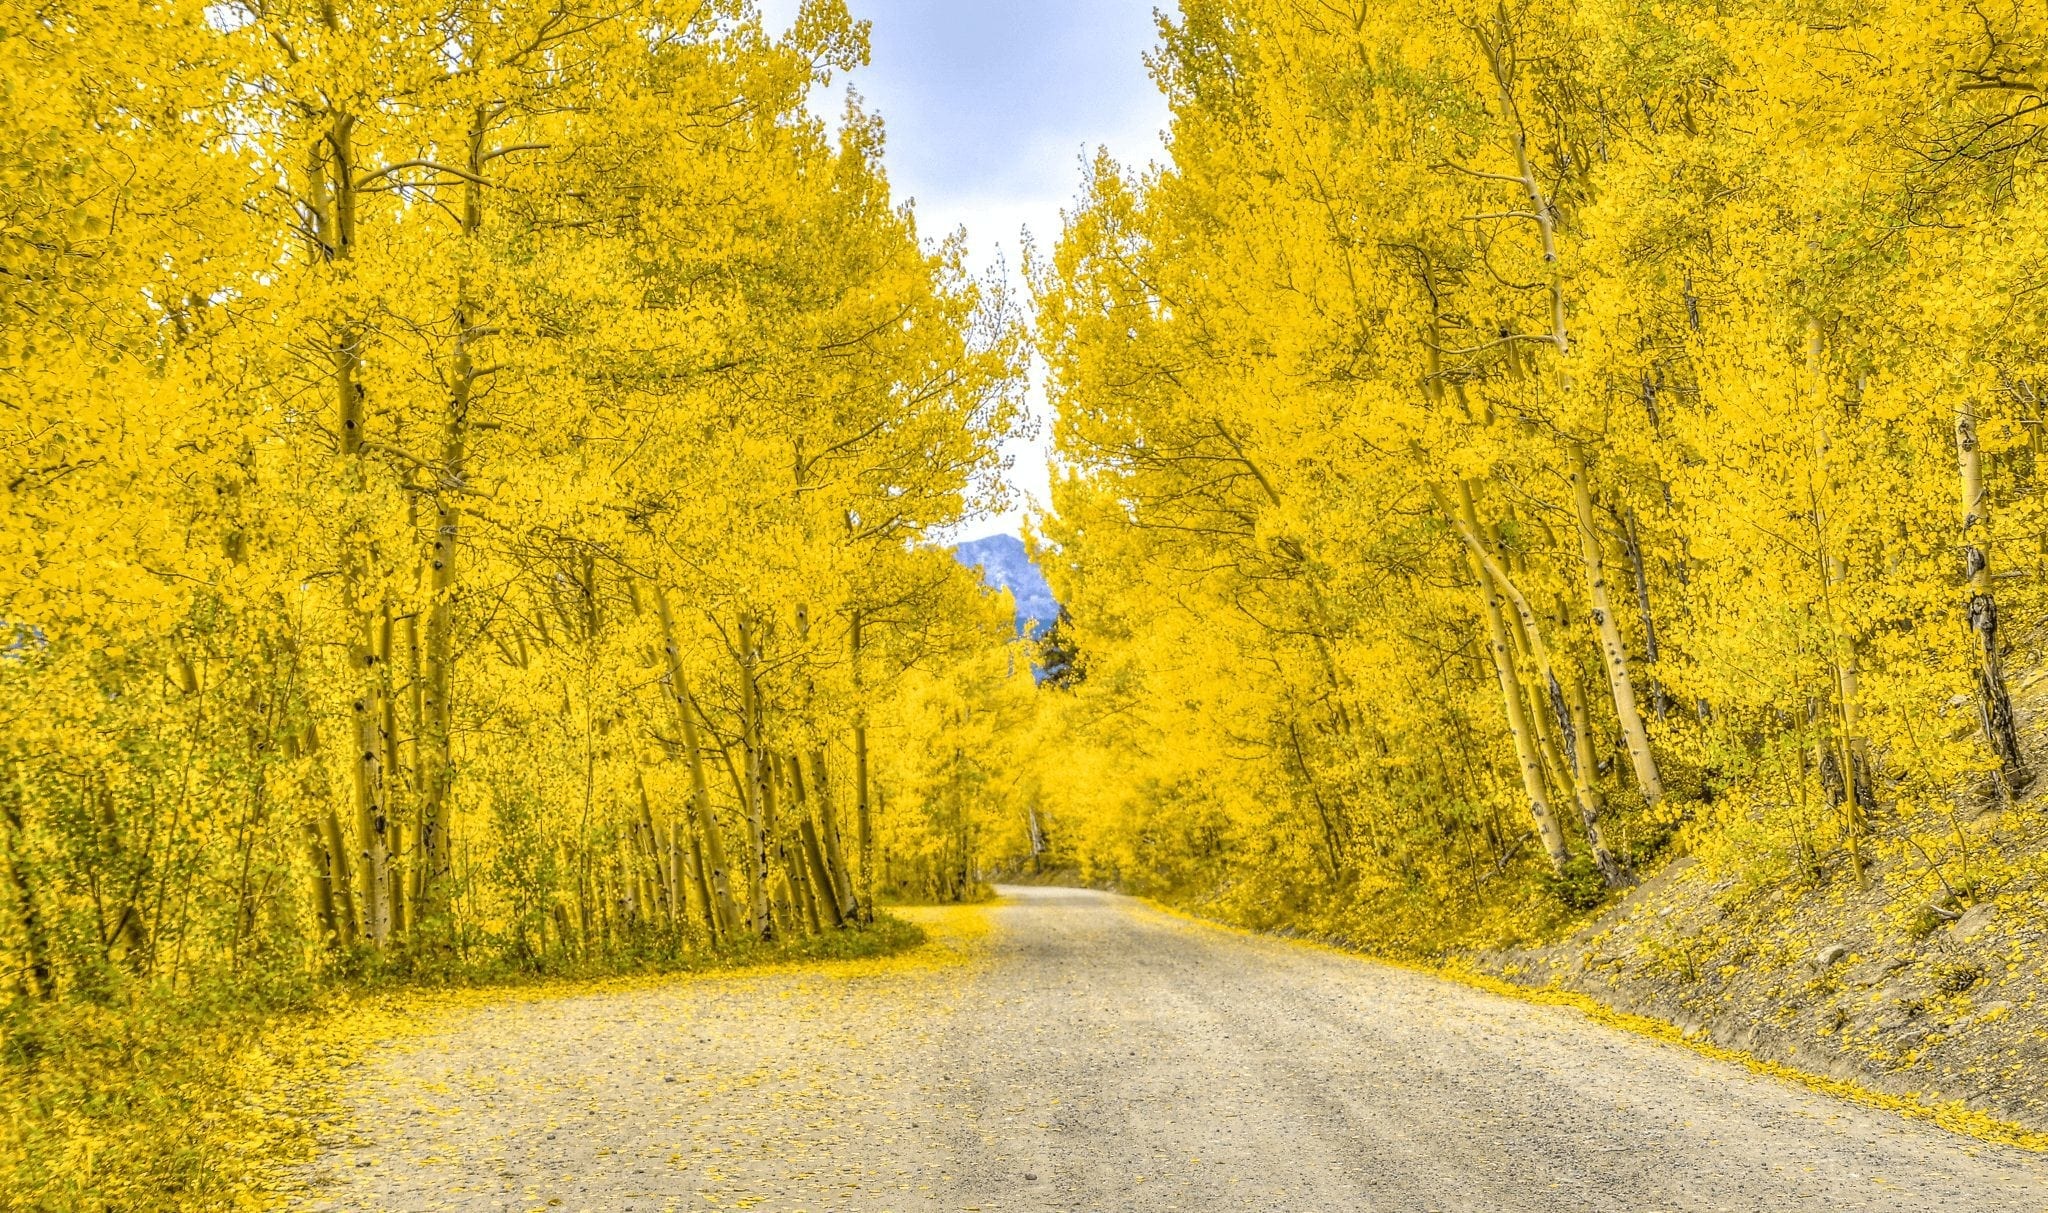 Boreas Pass Road in Fall with aspen foliage